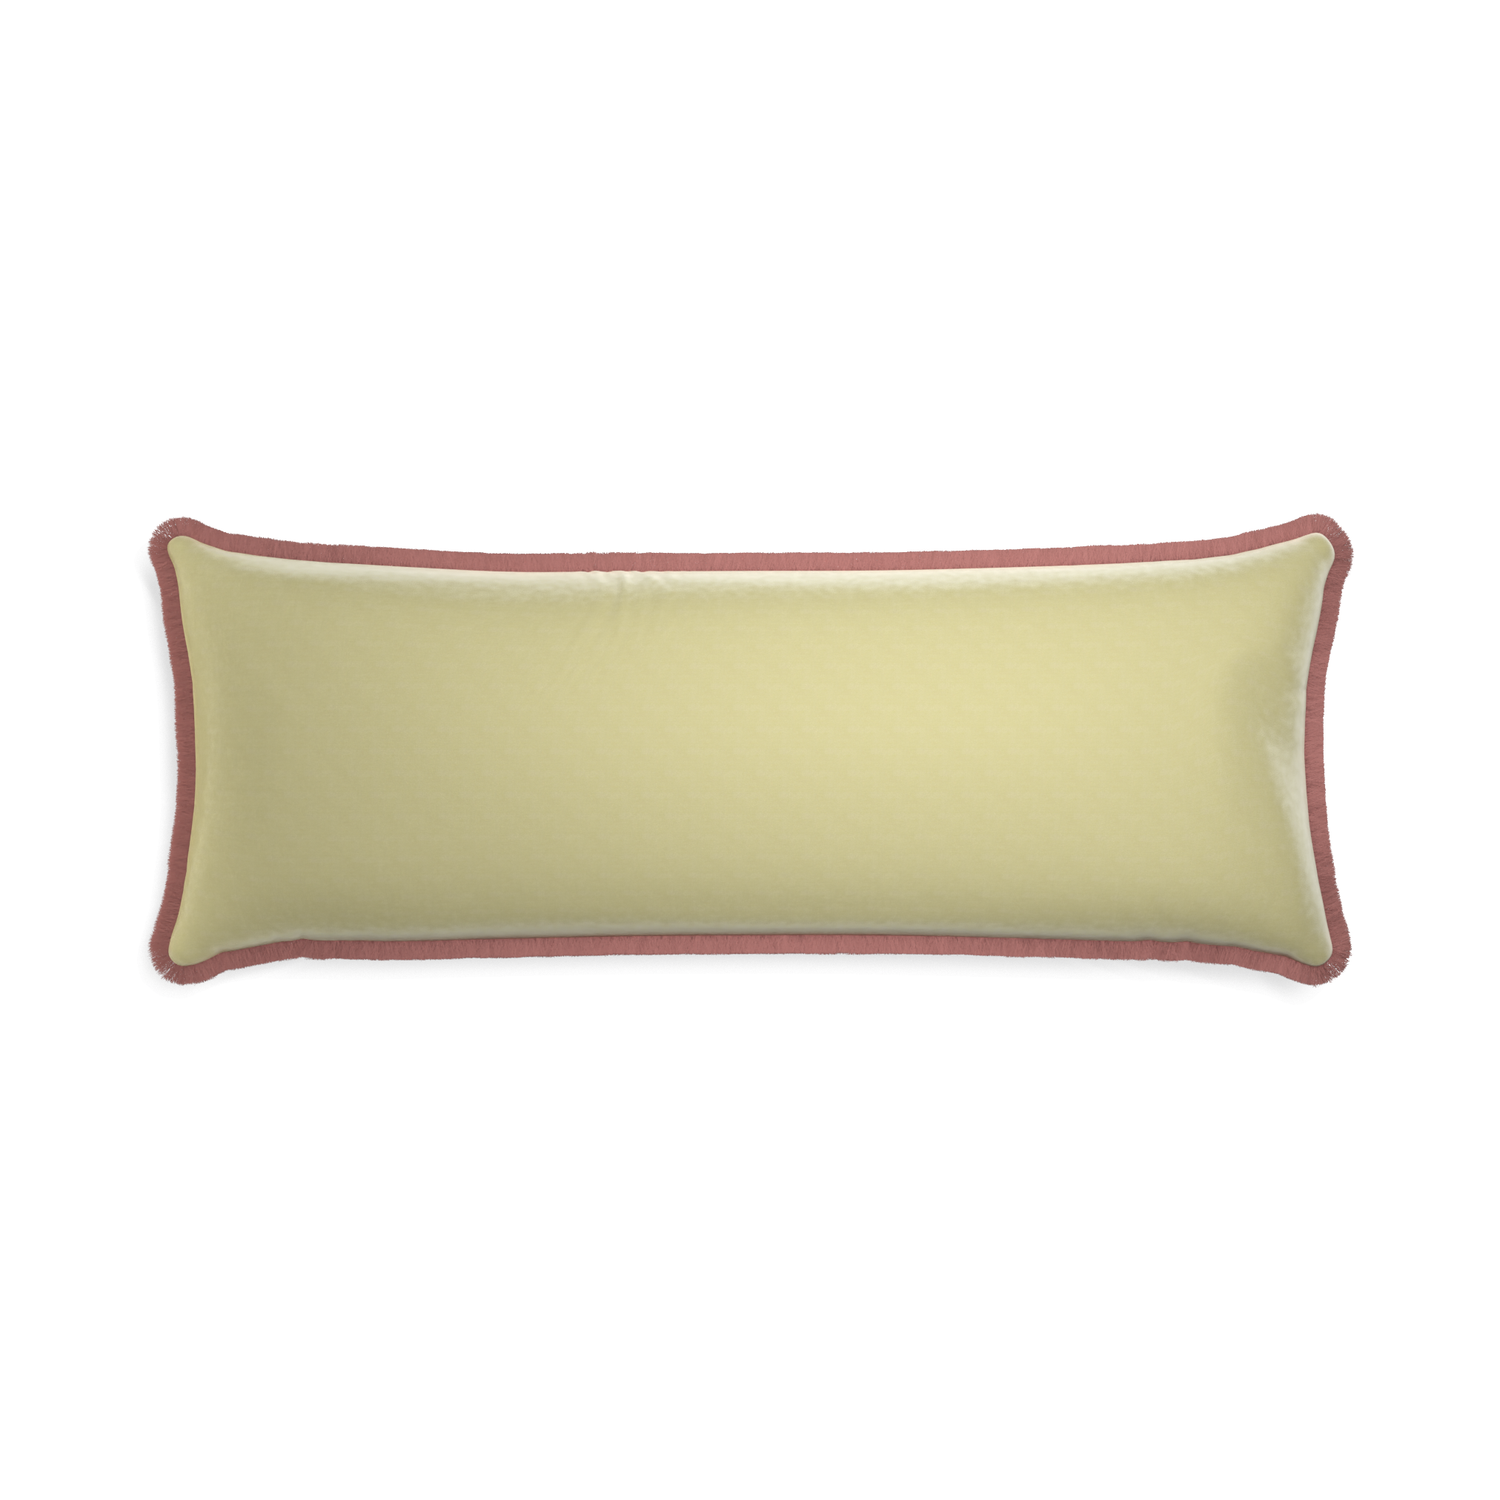 rectangle light green pillow with dusty rose pink fringe